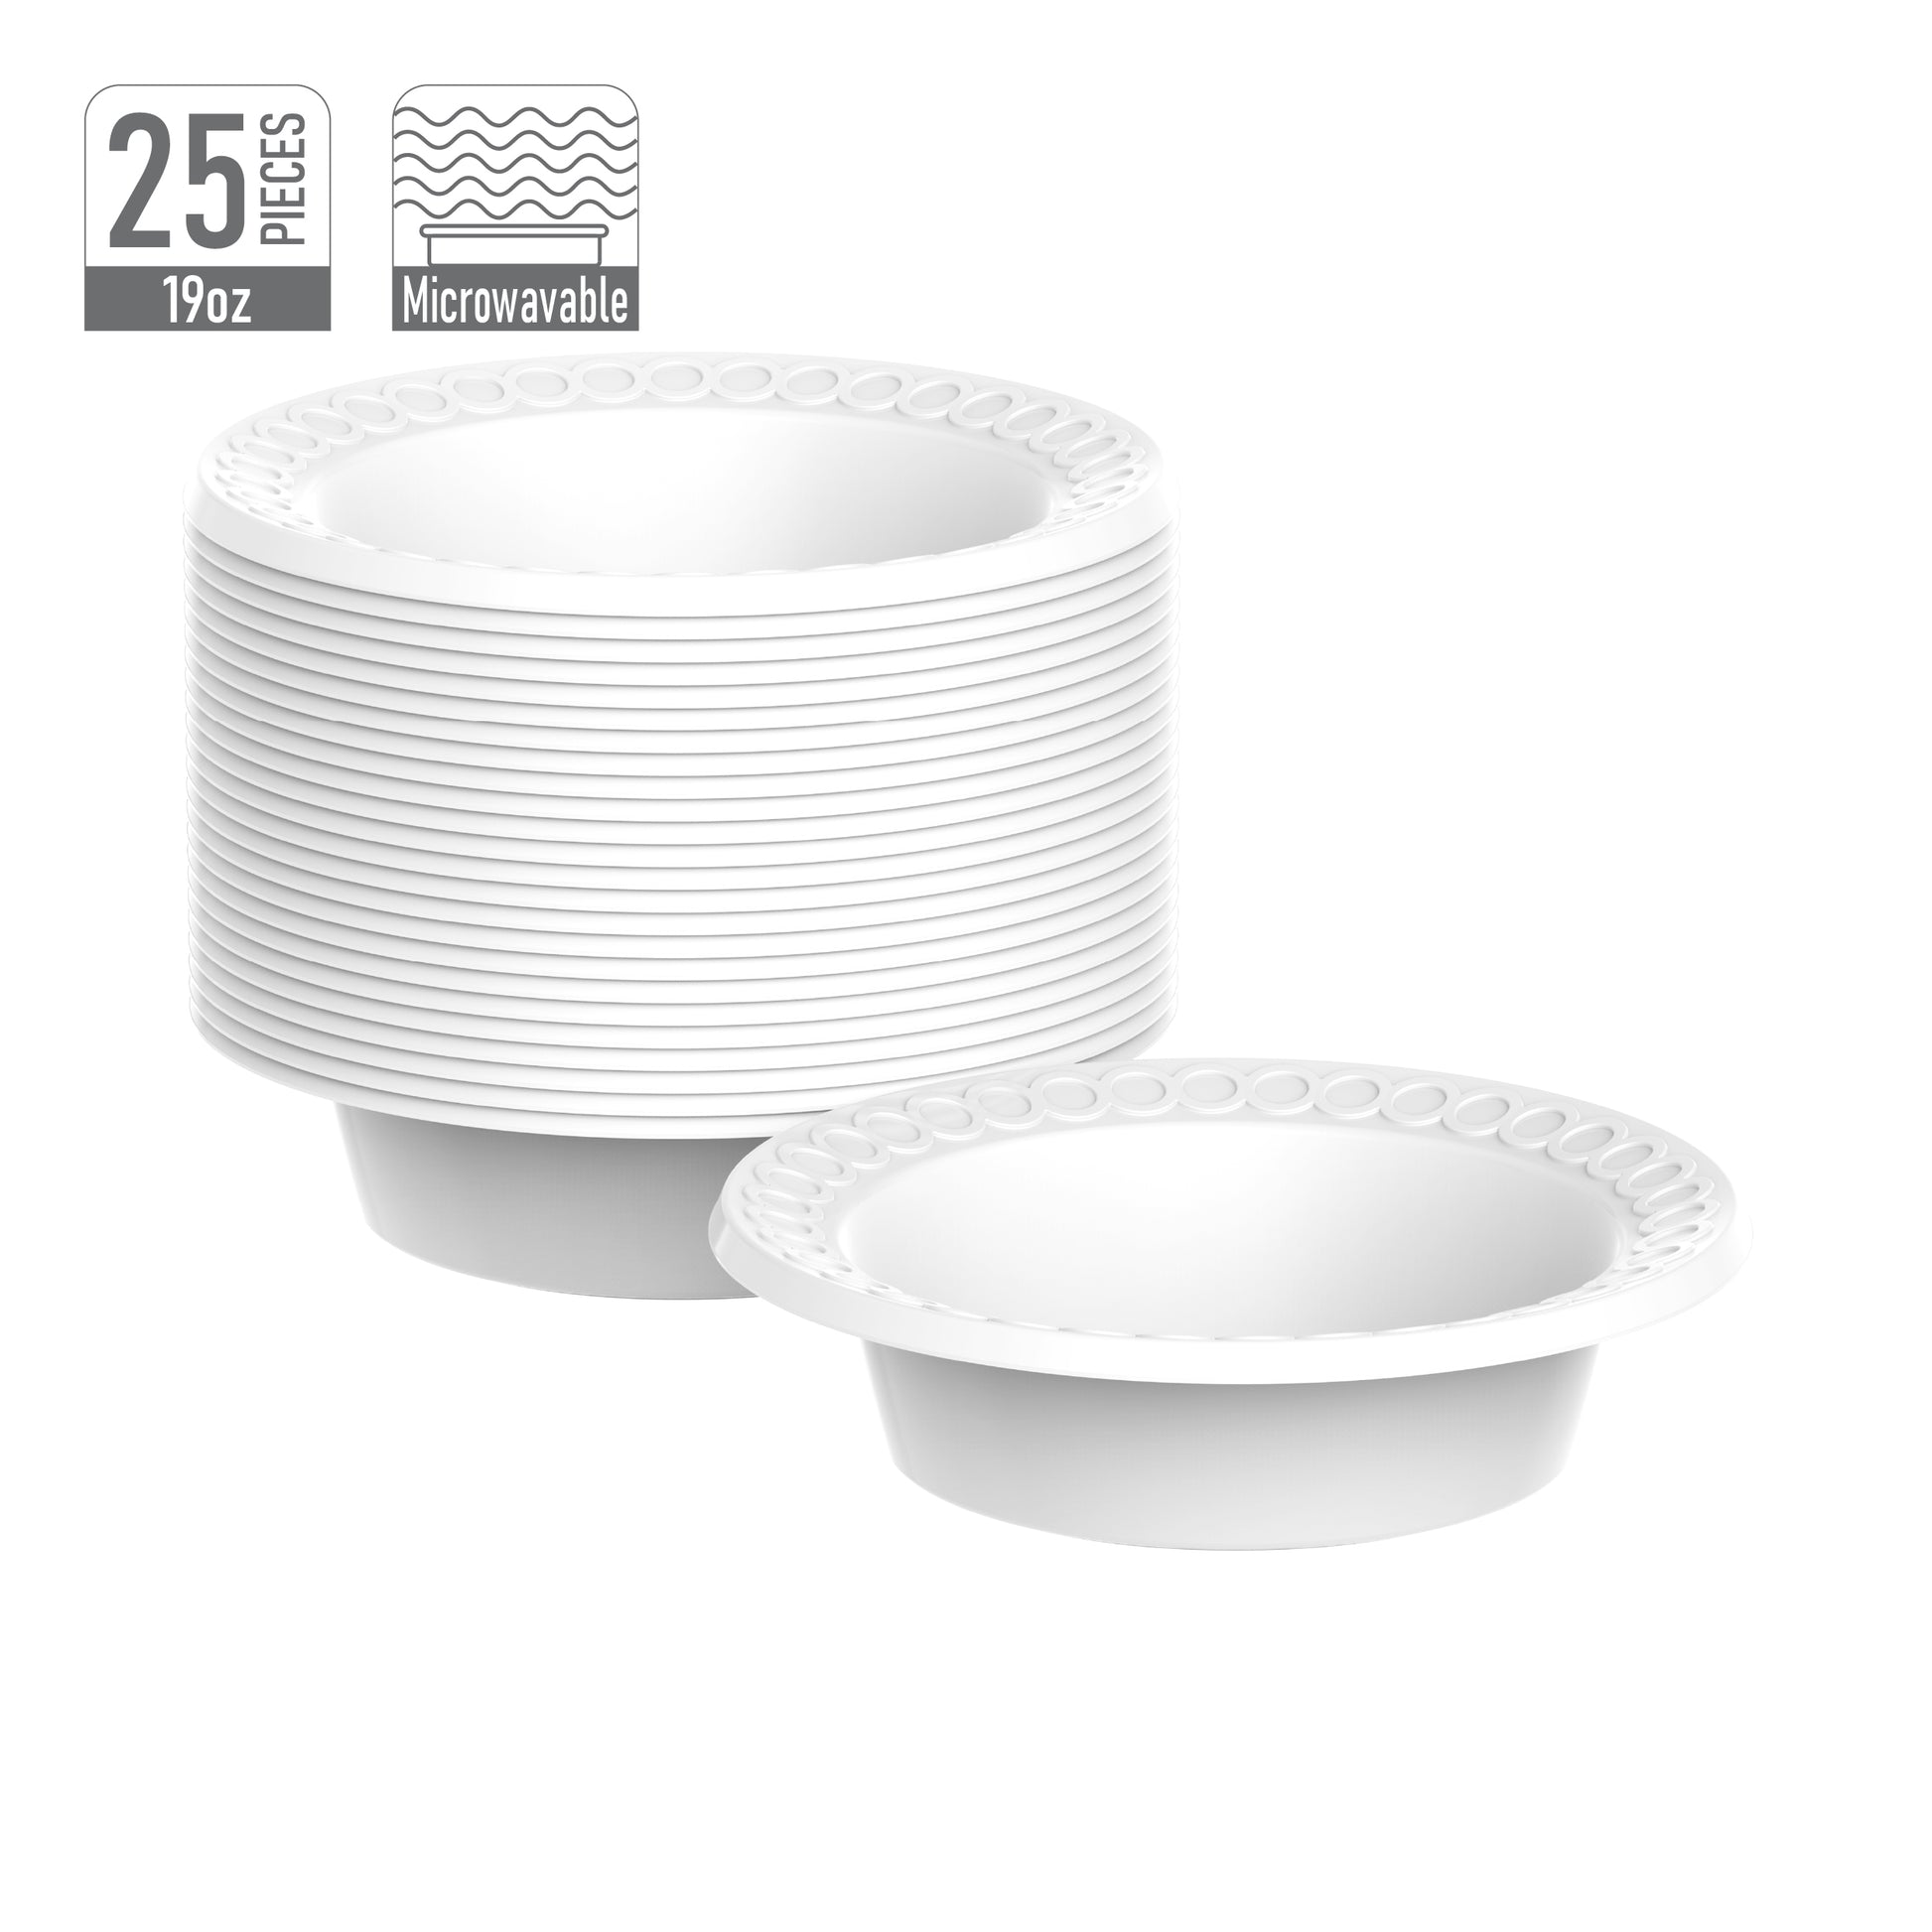 19 oz Pack of 25 Plastic Round Bowls